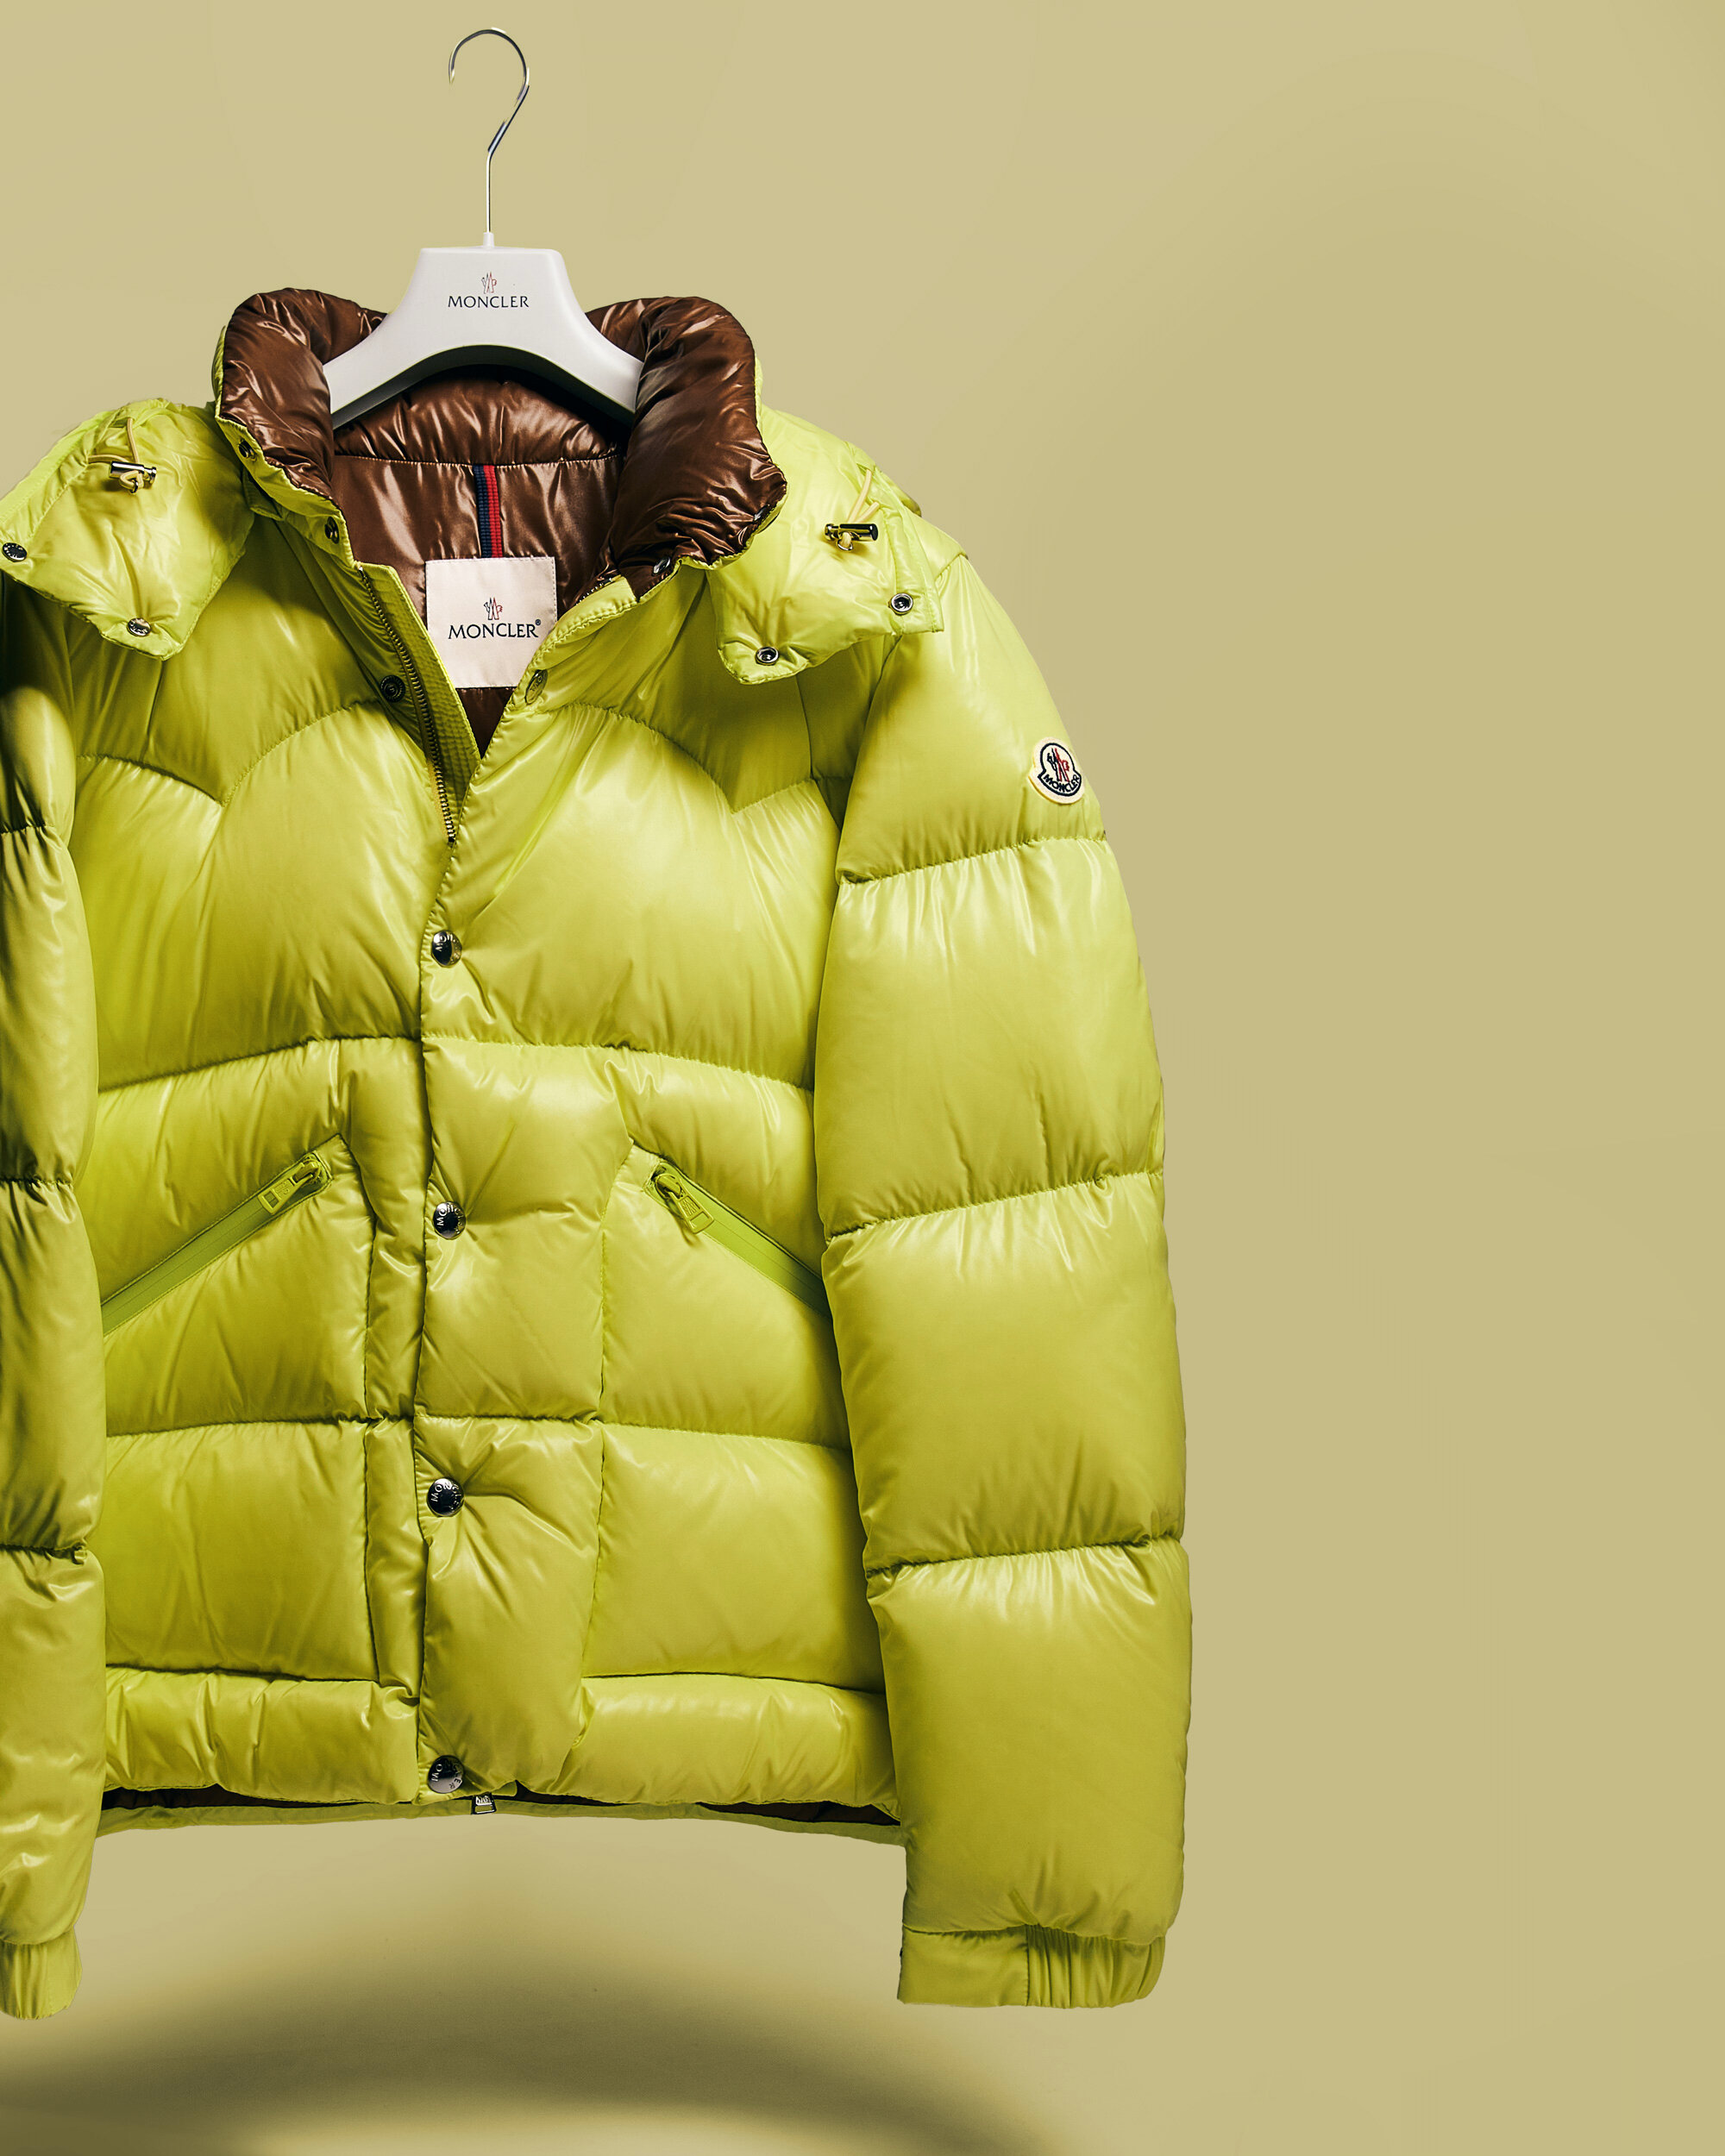 moncler-coutard-hooded-down-jacket-1a000-41-68950-112 1.jpg